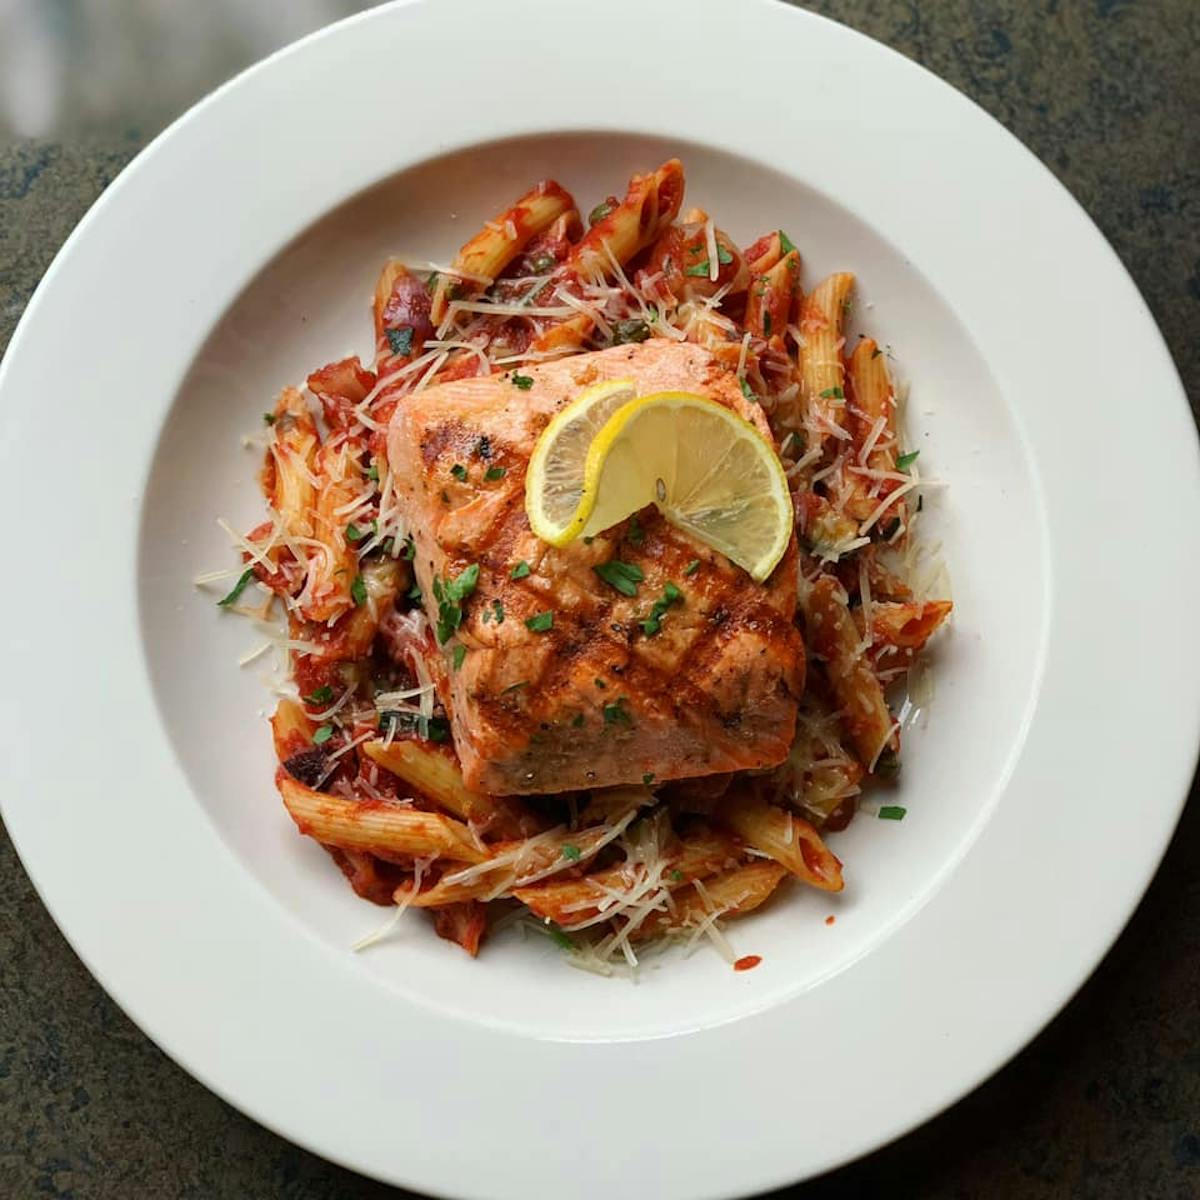 Grilled salmon over penne pasta